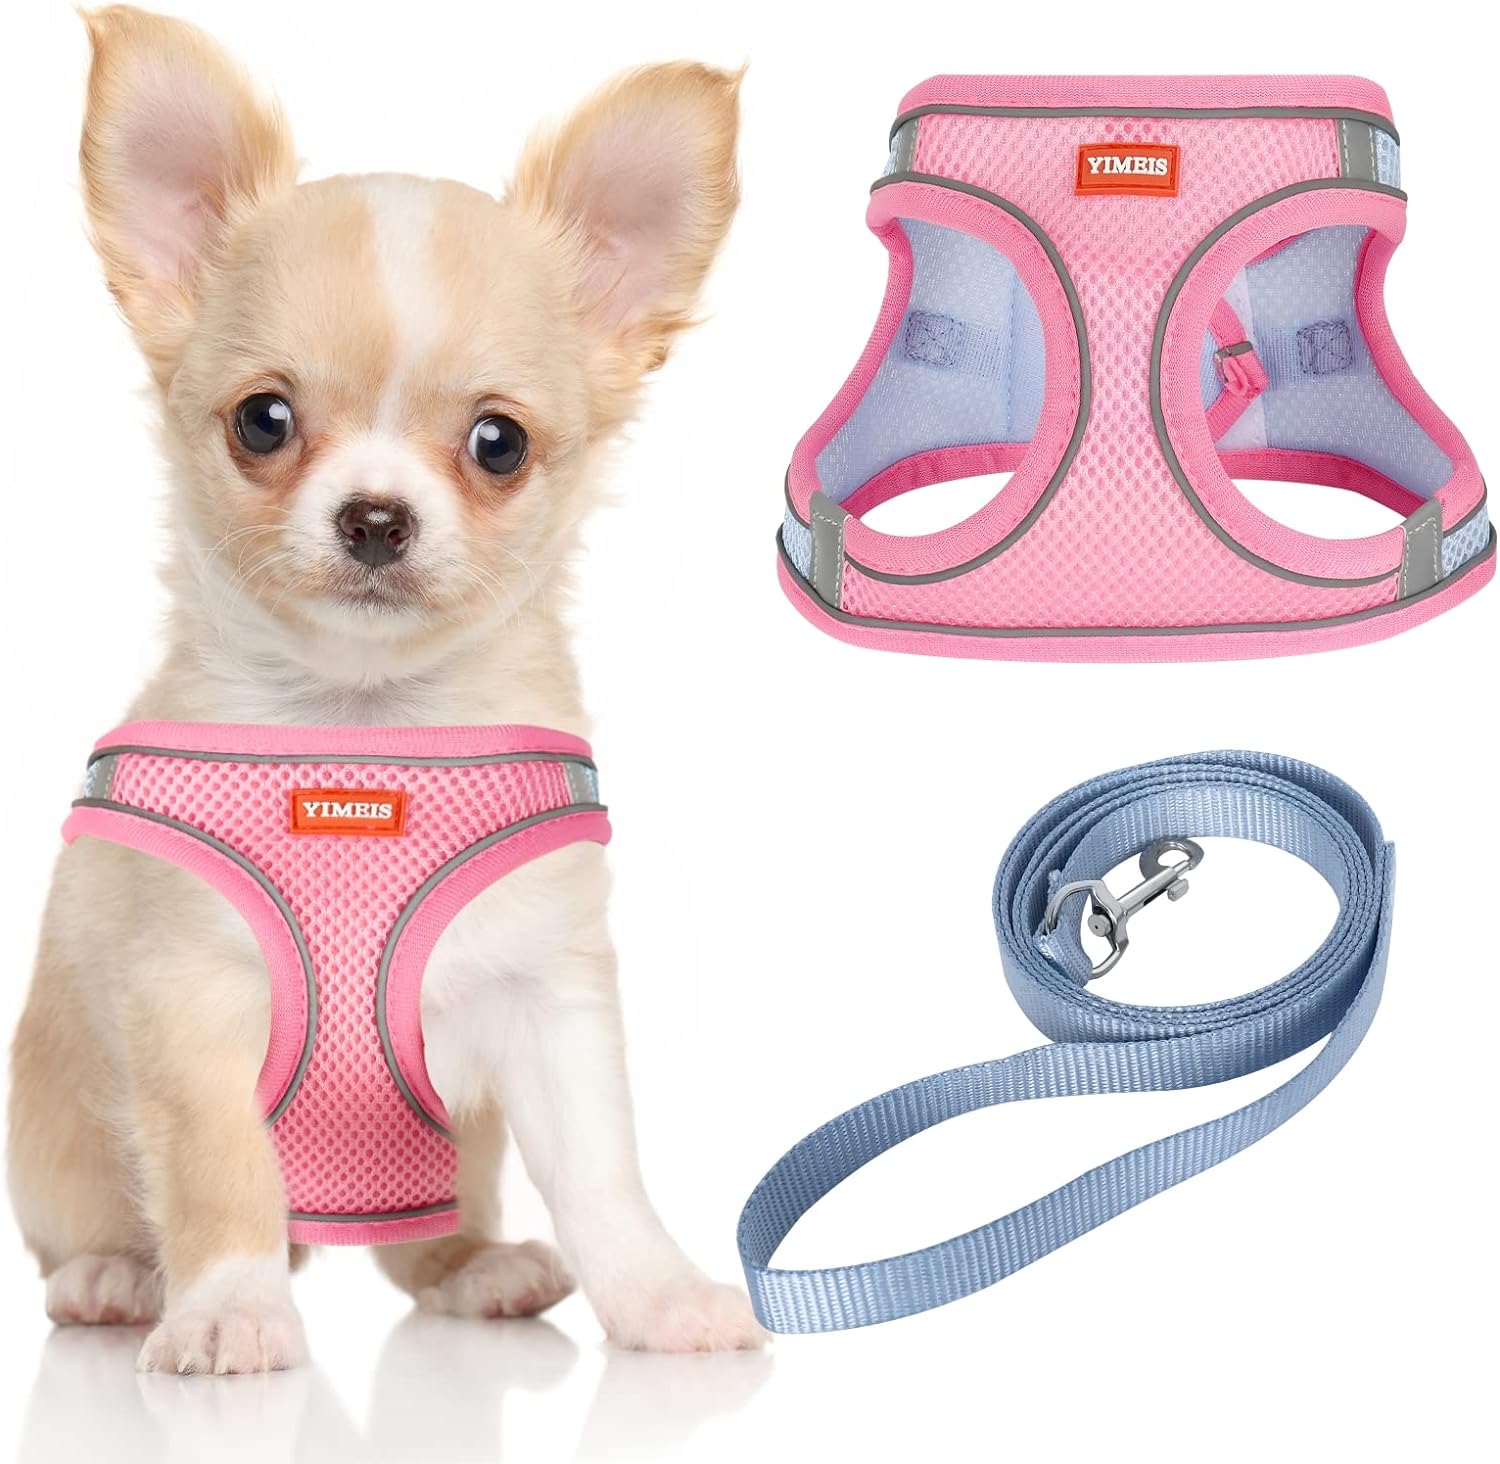 YIMEIS Dog Harness and Leash Set, No Pull Soft Mesh Pet Harness, Reflective Adjustable Puppy Vest for Small Medium Large Dogs, Cats (Pinkblue, Medium (Pack of 1))